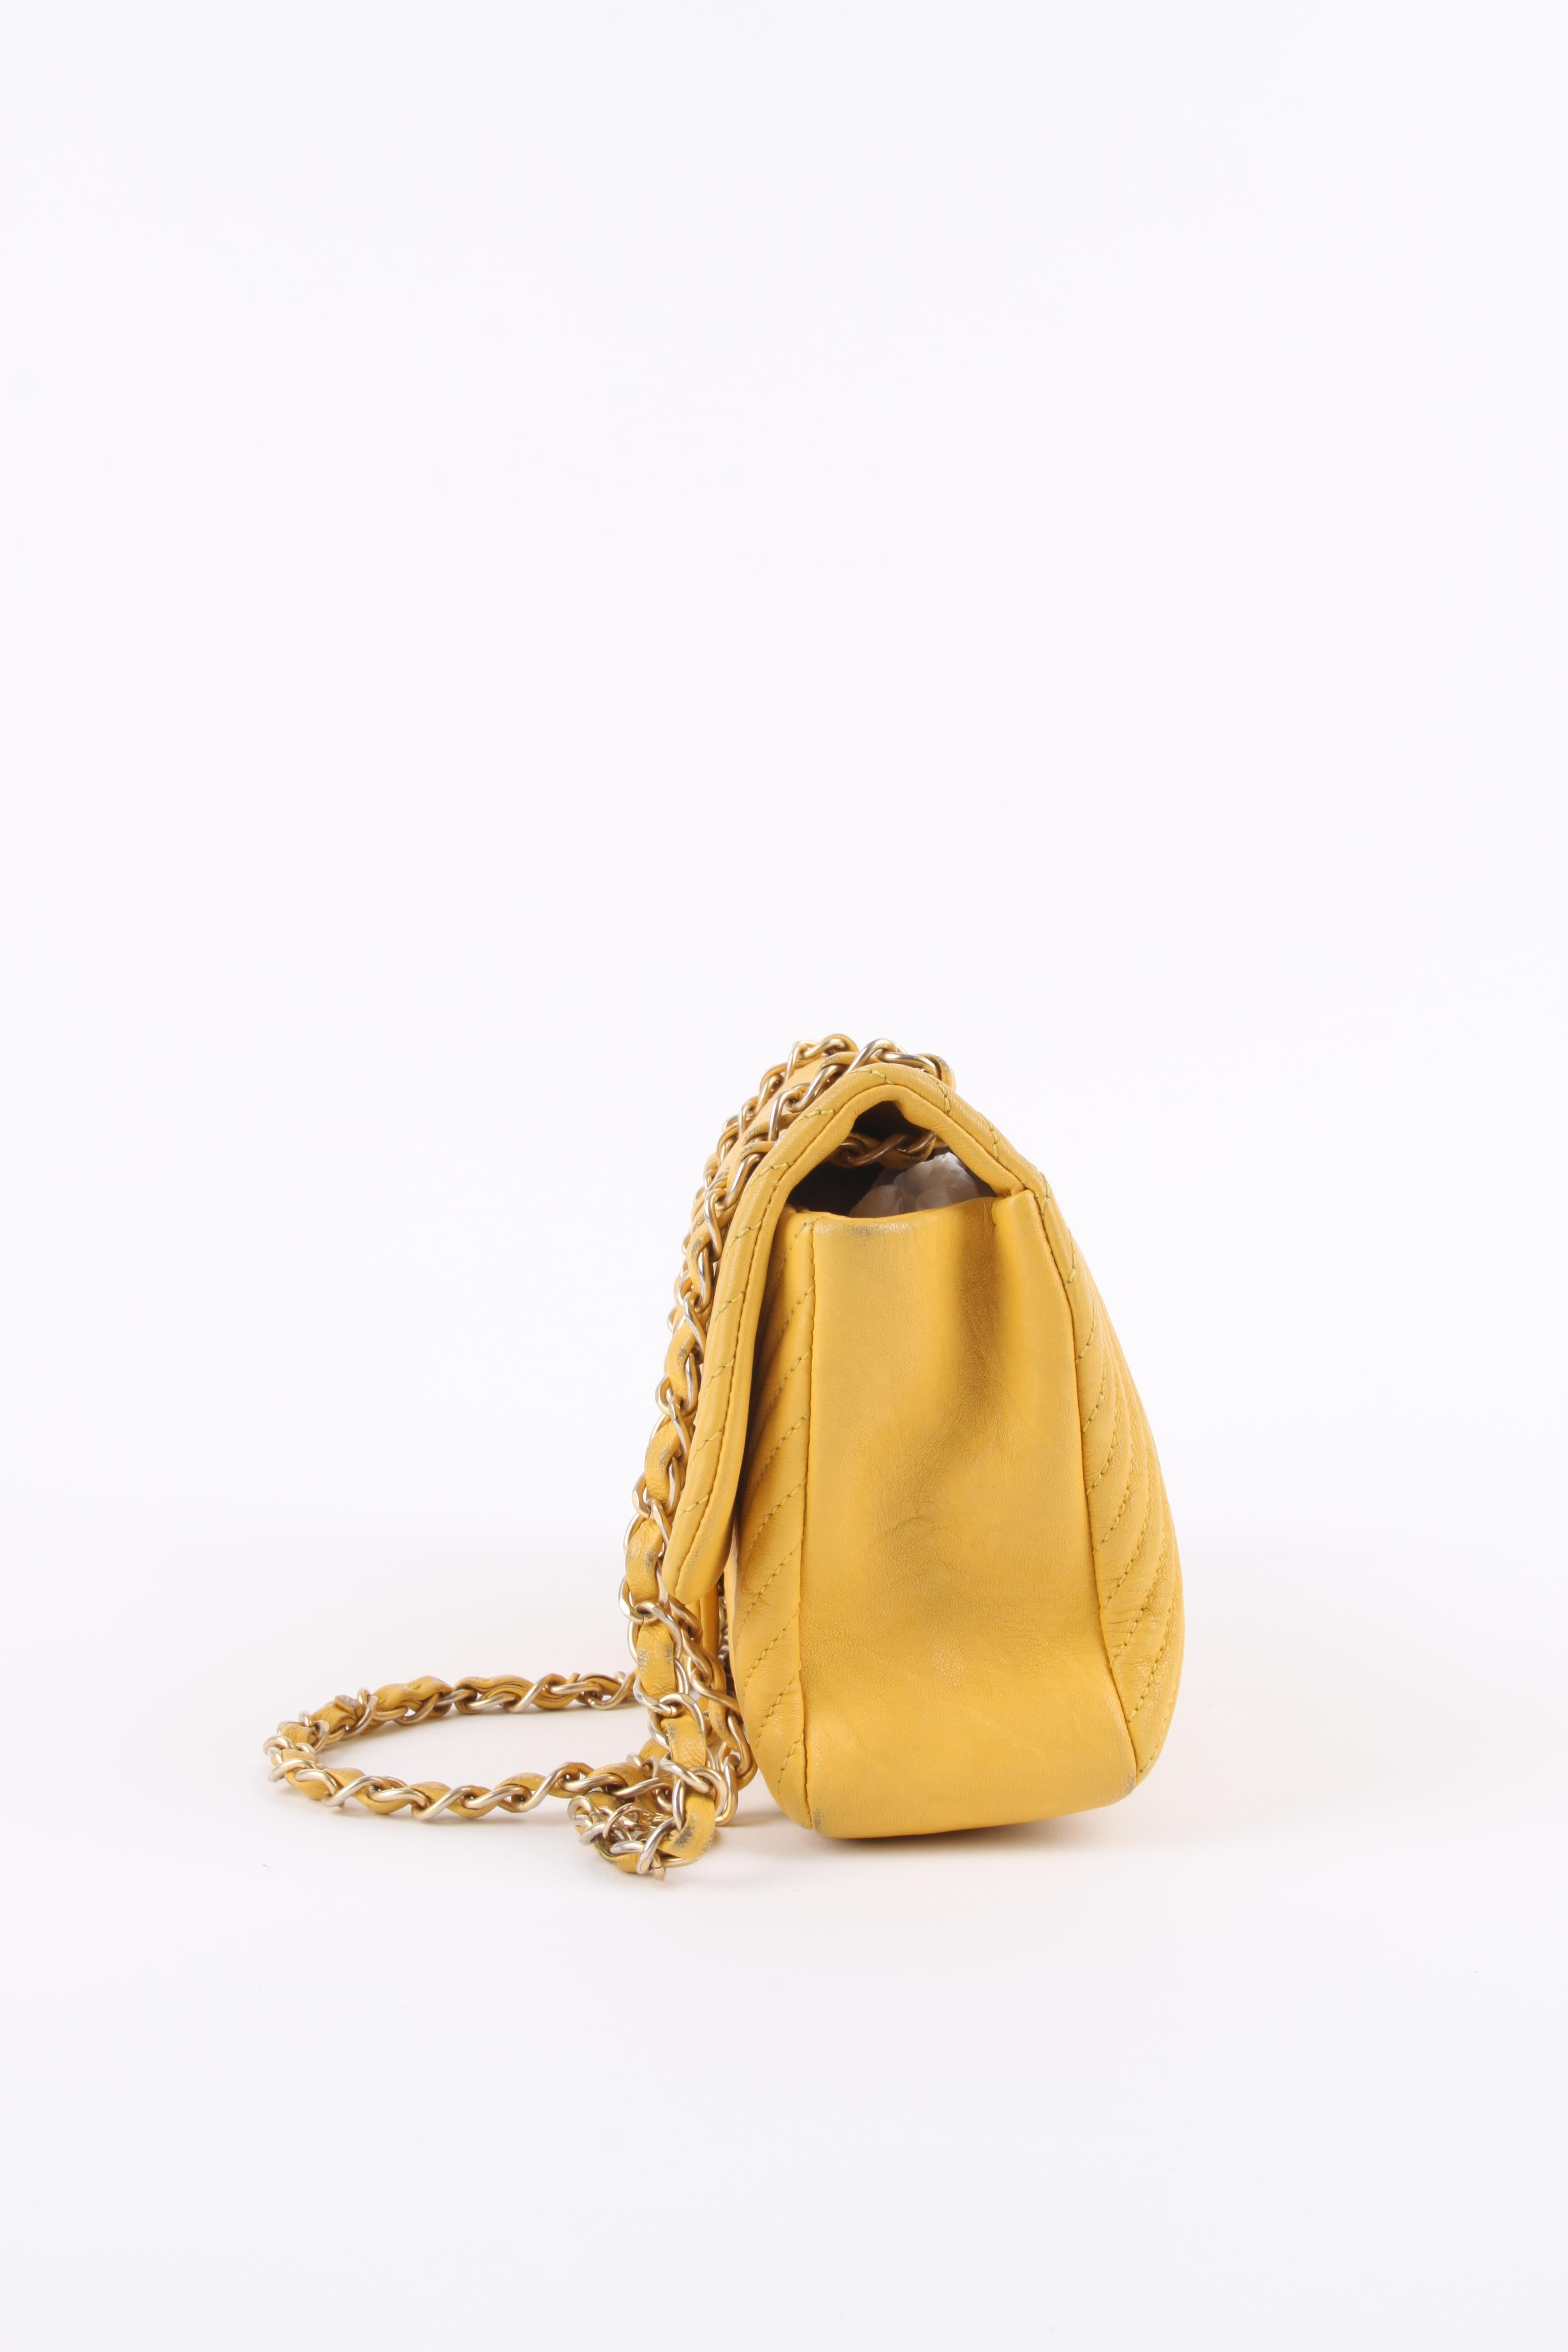 Yellow Chanel Chevron Quilted Rectangular Flap Bag - yellow